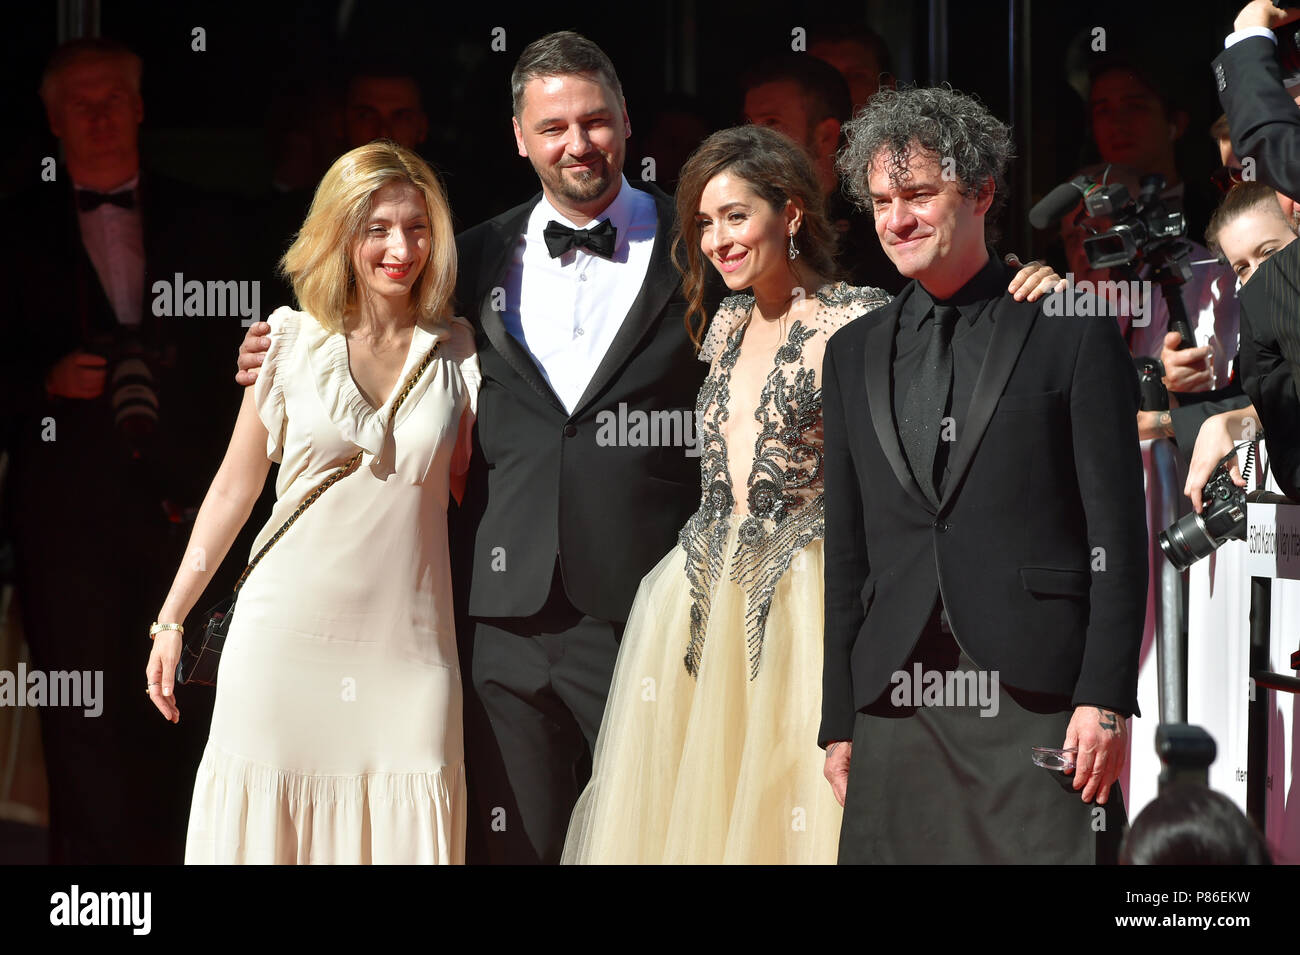 Karlovy Vary, Czech Republic. 07th July, 2018. The Grand Jury members Italian producer Marta Donzelli, from left, dean of Prague's Film Academy (FAMU), publicist and producer Zdenek Holy, Croatian actress Zrinka Cvitesic and Northern Ireland-born, Scotland-based film theorist and director Mark Cousins arrive to closing ceremony of the 53rd Karlovy Vary International Film Festival (KVIFF) in the Czech Republic on July 7, 2018. Credit: Katerina Sulova/CTK Photo/Alamy Live News Stock Photo